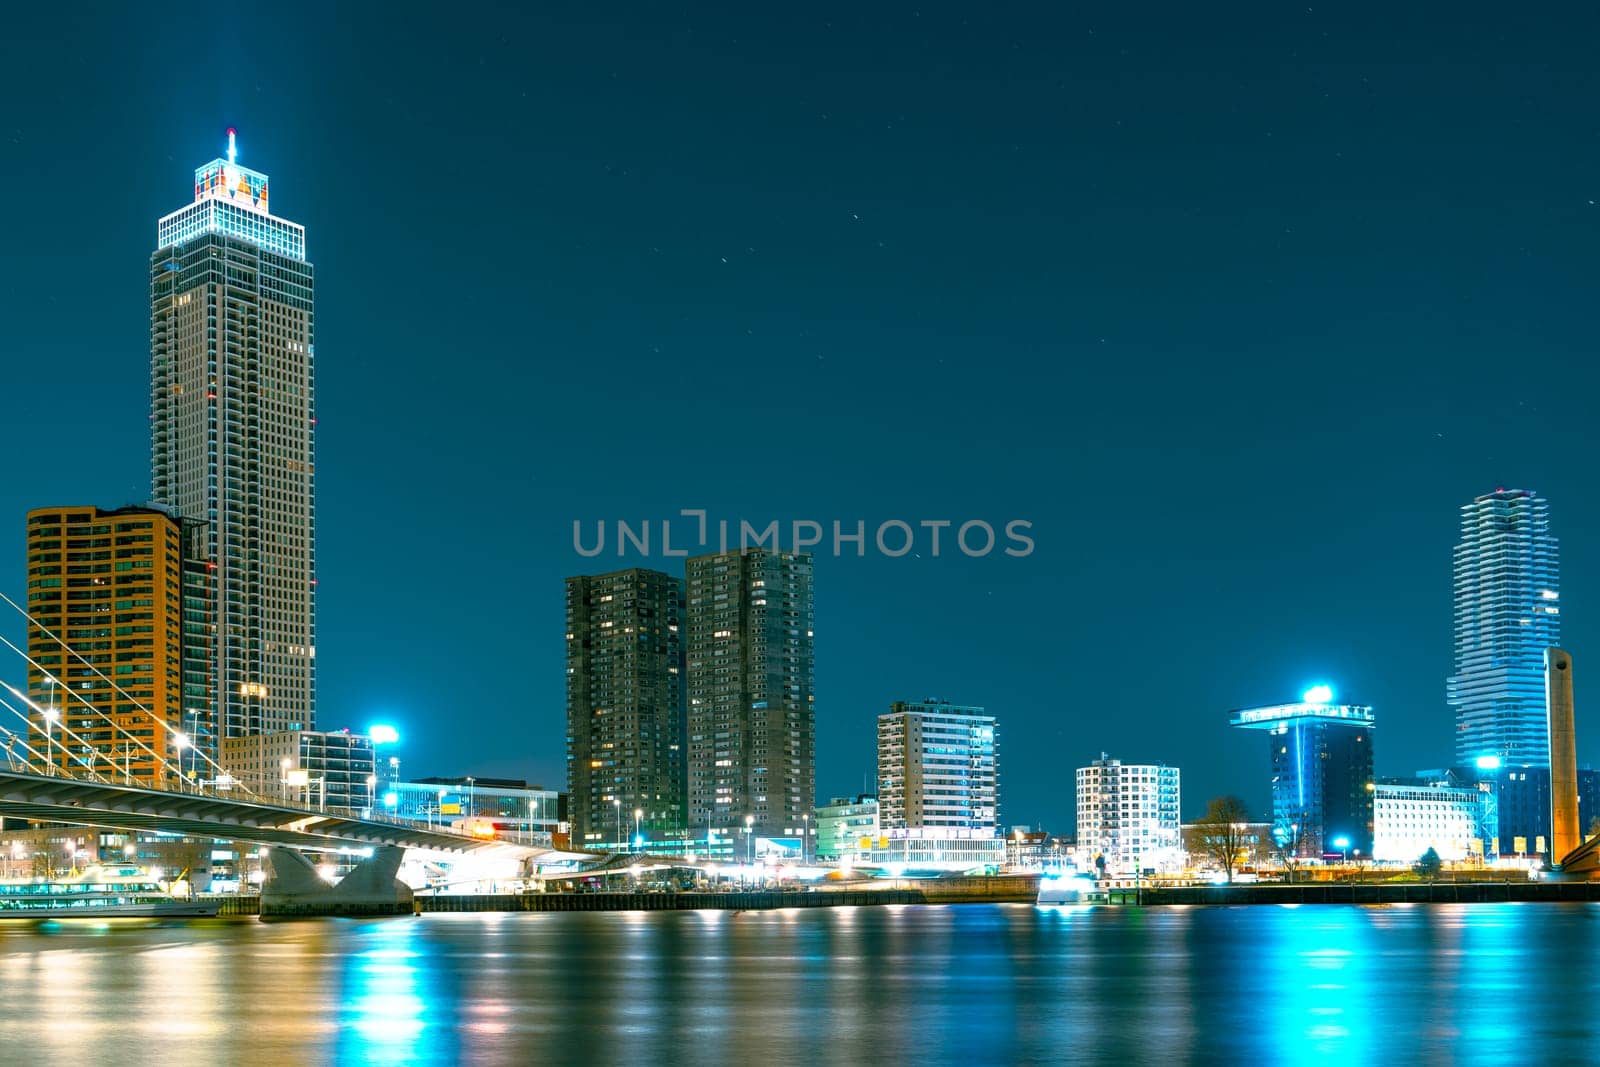 A stunning night panorama of Rotterdam featuring modern high-rise structures illuminated against a starry sky, creating a mesmerizing urban landscape.